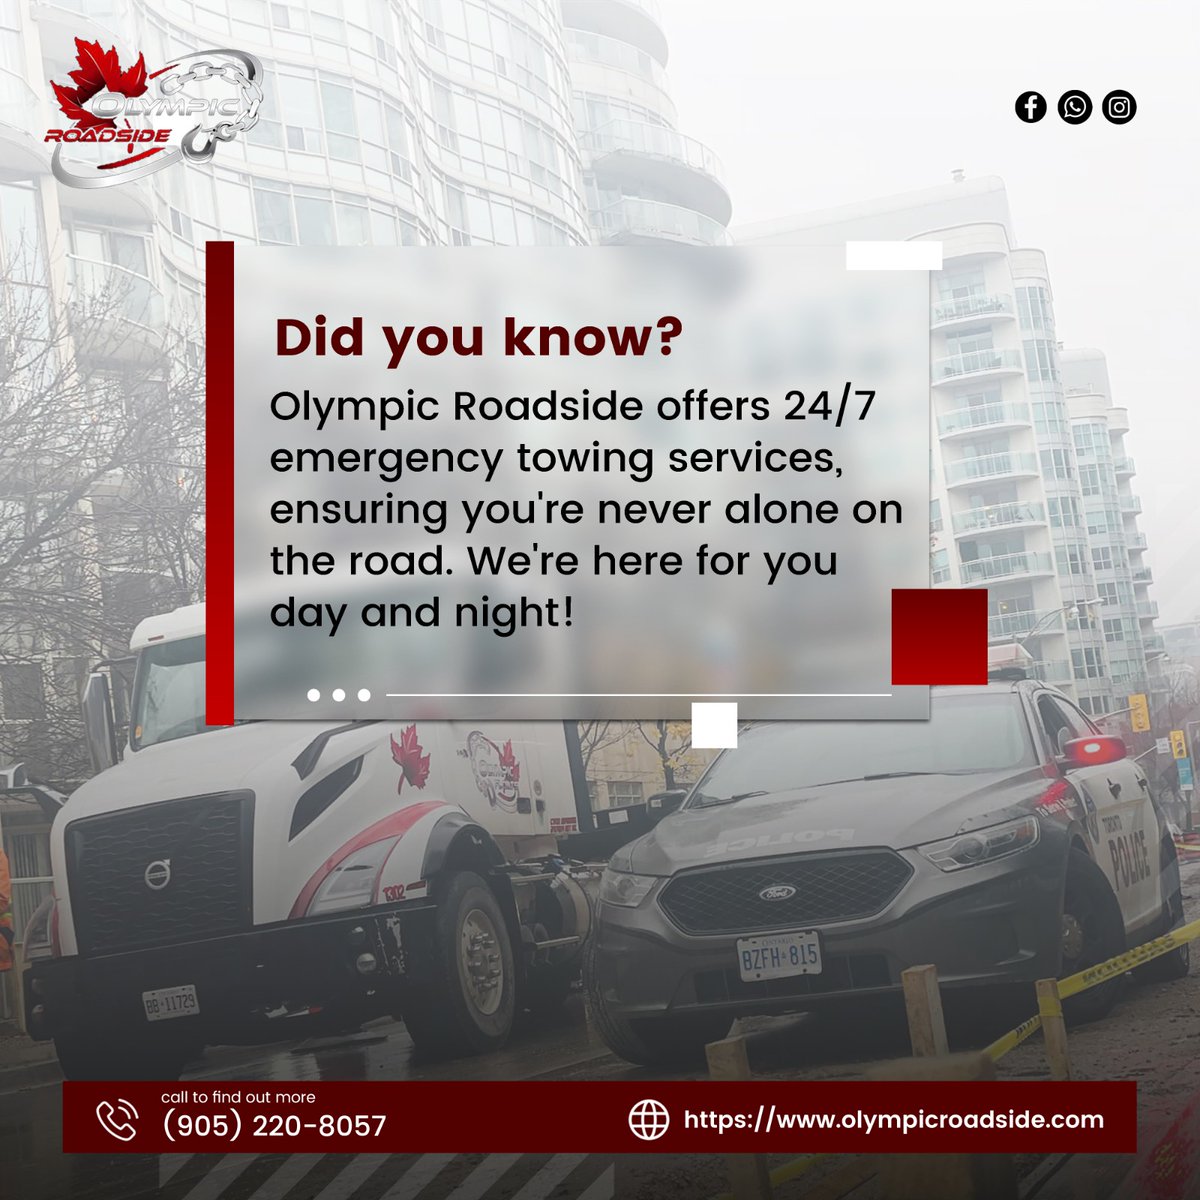 🚗 Olympic Roadside: Your 24/7 lifeline on the road. Never face car troubles alone – we're here day and night for all your emergency towing needs! 
.
#OlympicRoadside #EmergencyTowing #RoadsideAssistance #AlwaysThereForYou #DayAndNightRescue #ReliableOnTheRoad